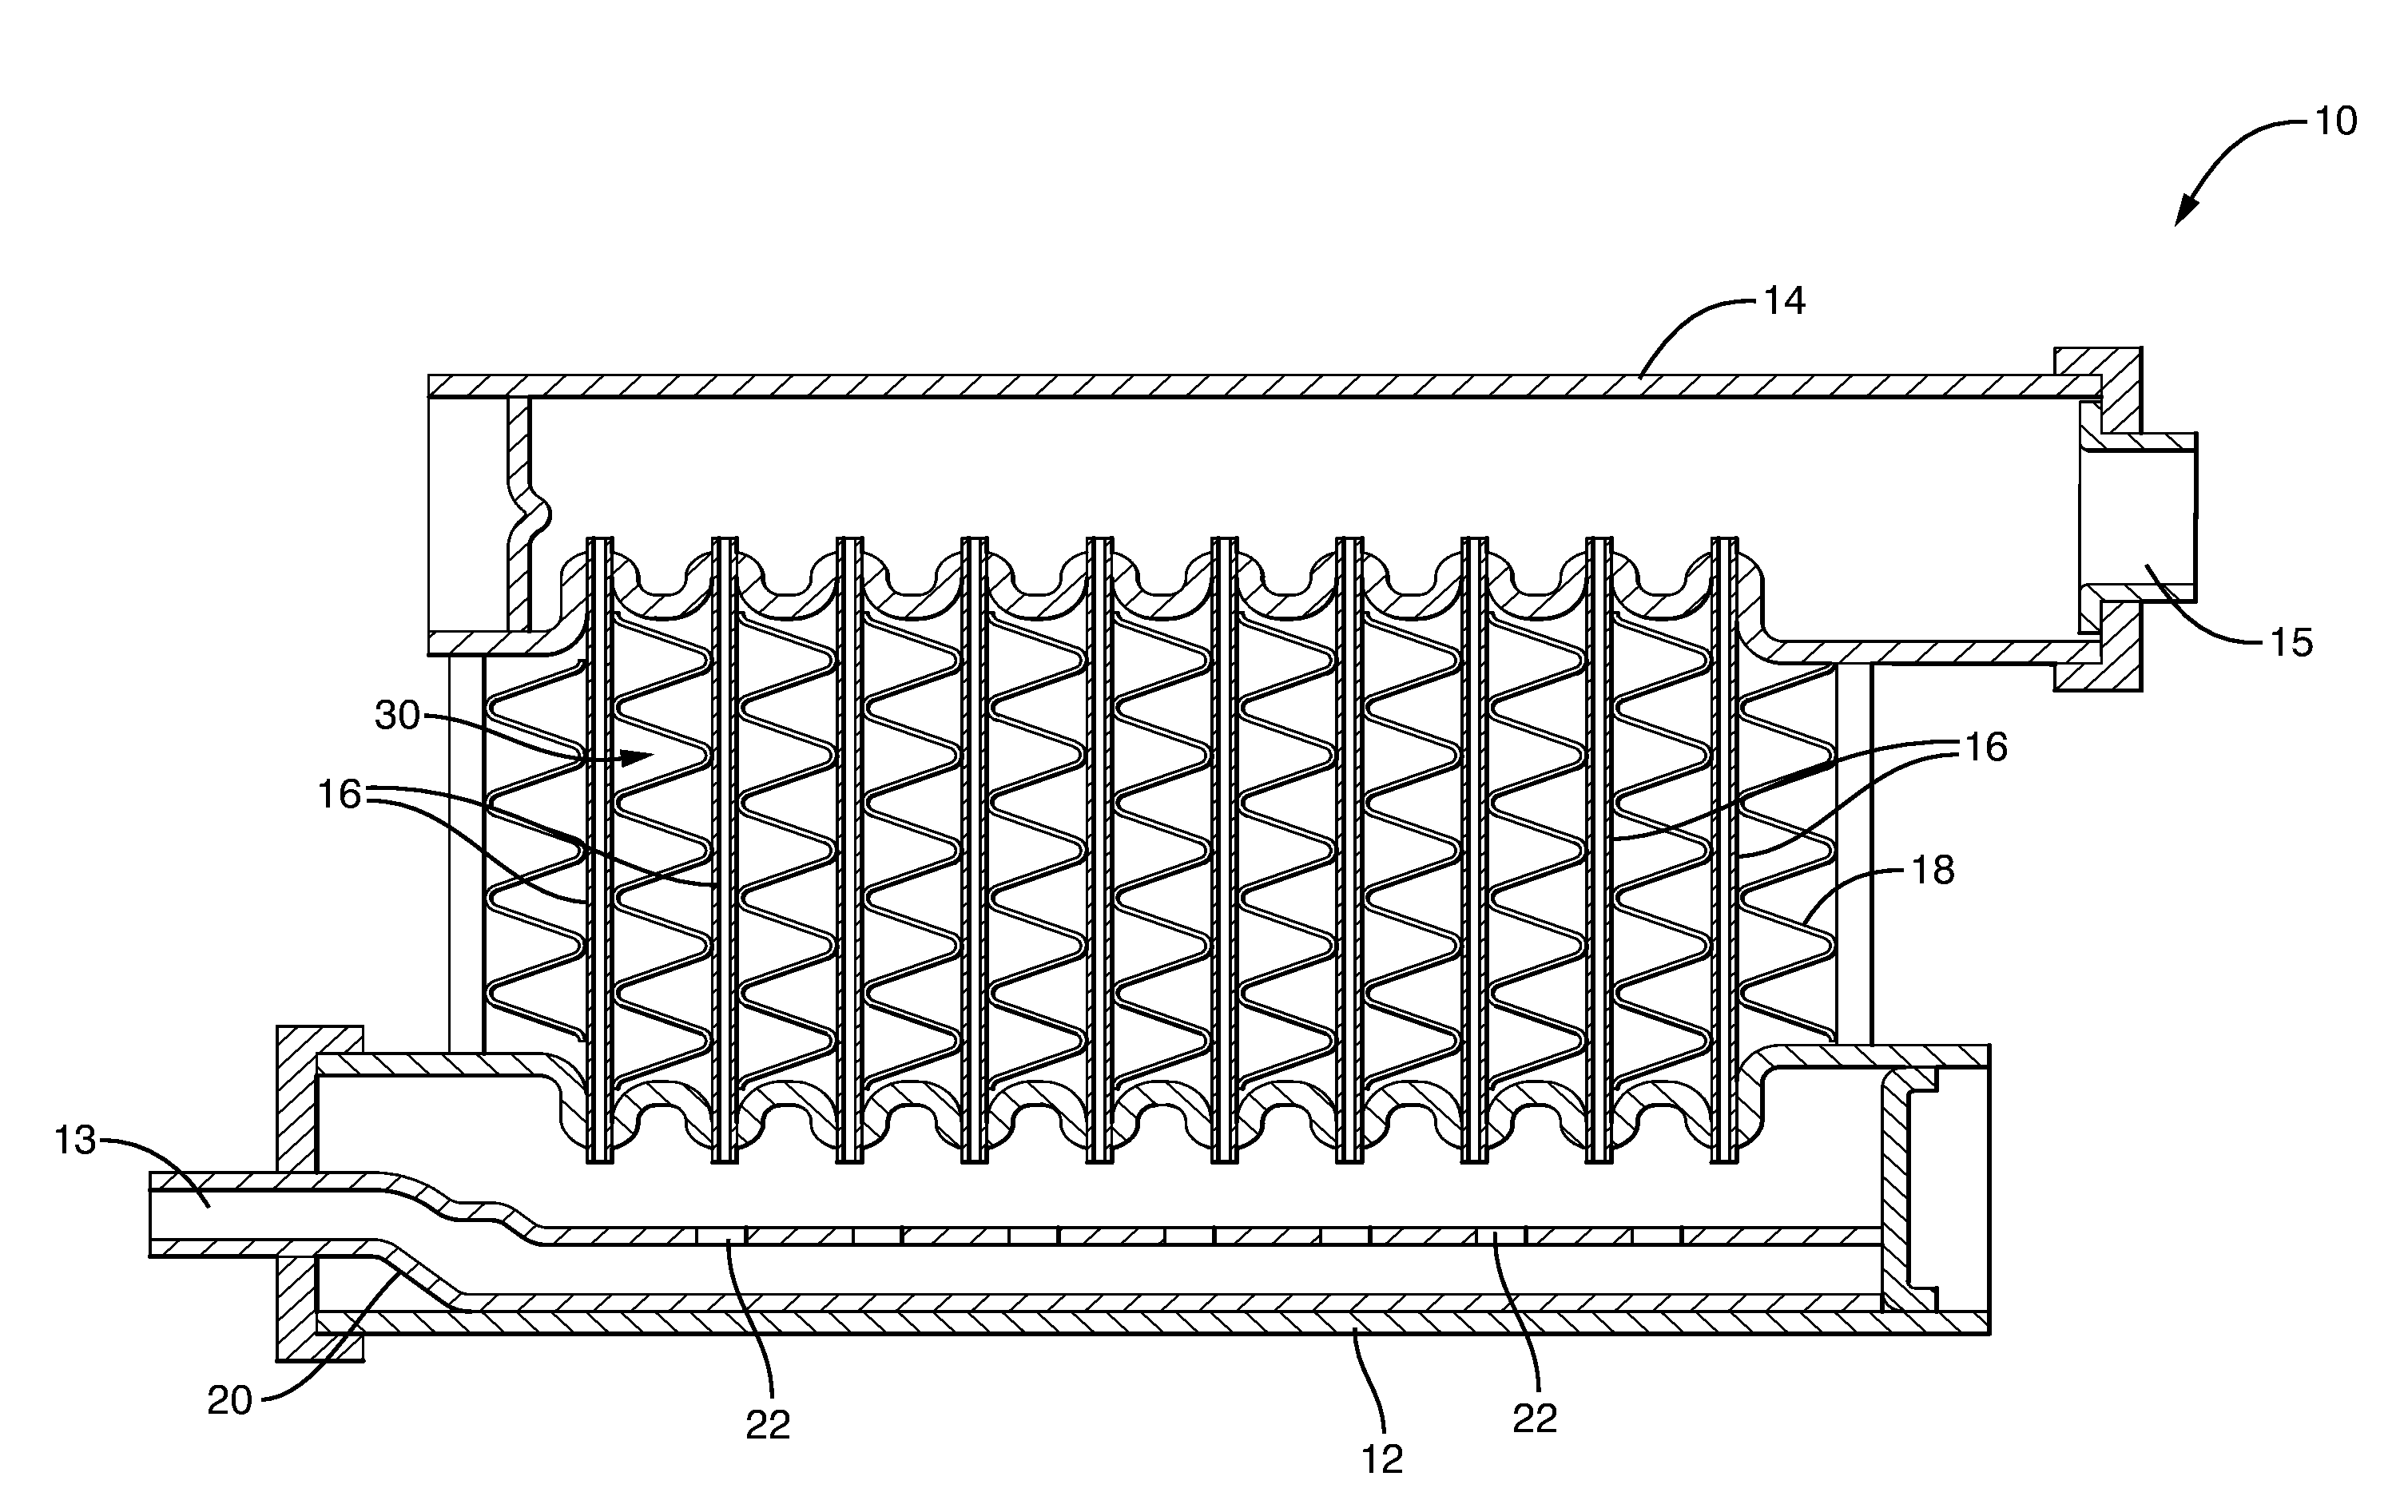 Heat exchanger having an inlet distributor and outlet collector